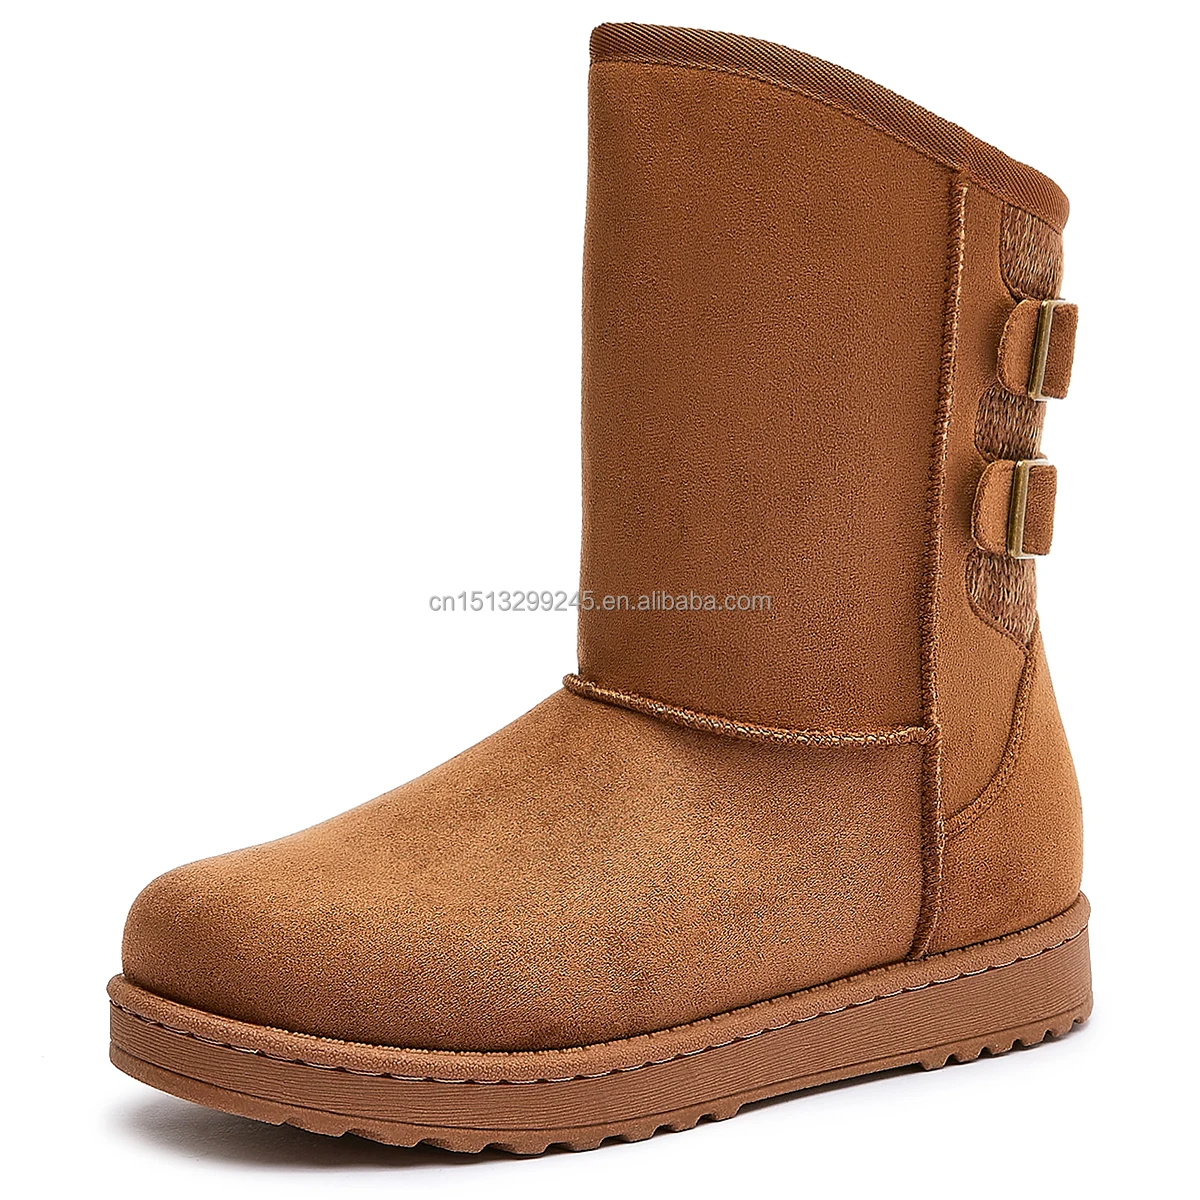 Custom women boots comfortable warm fashion female winter boots shoes for ladies